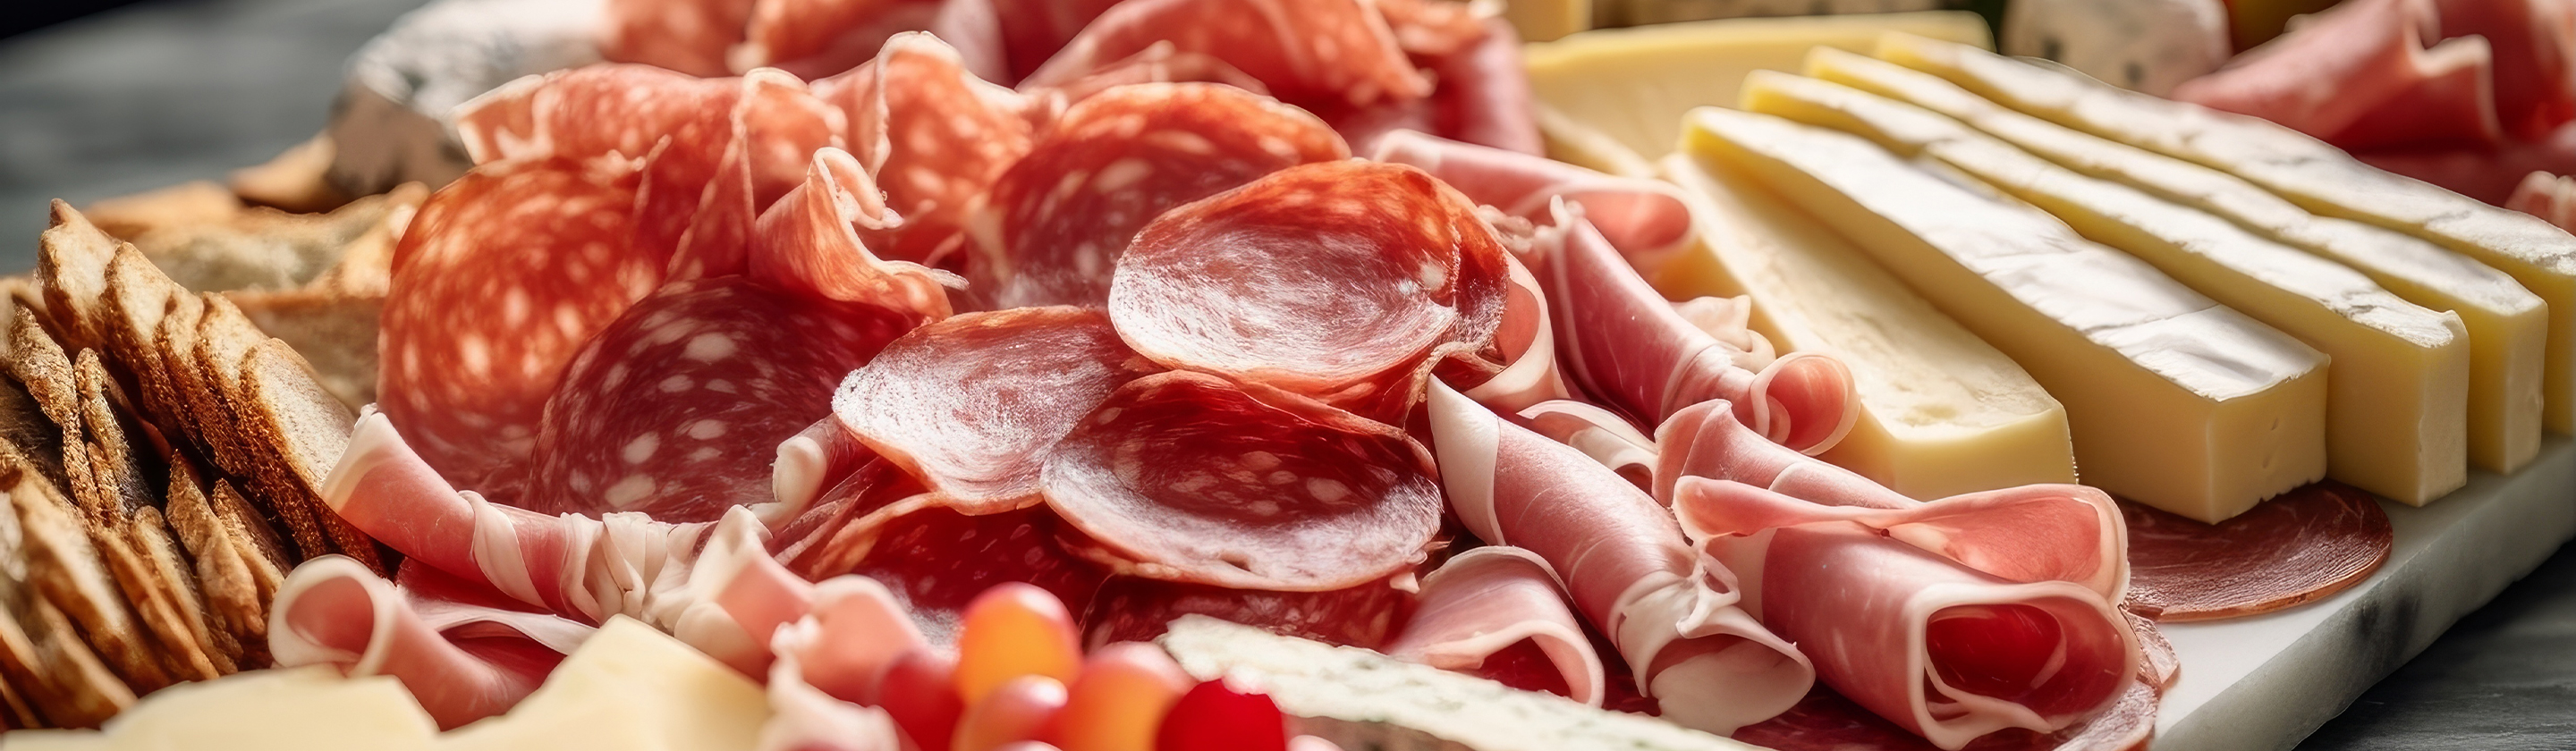 EU set New Reduced Limits for the Use of Nitrites and Nitrates as Food Additives